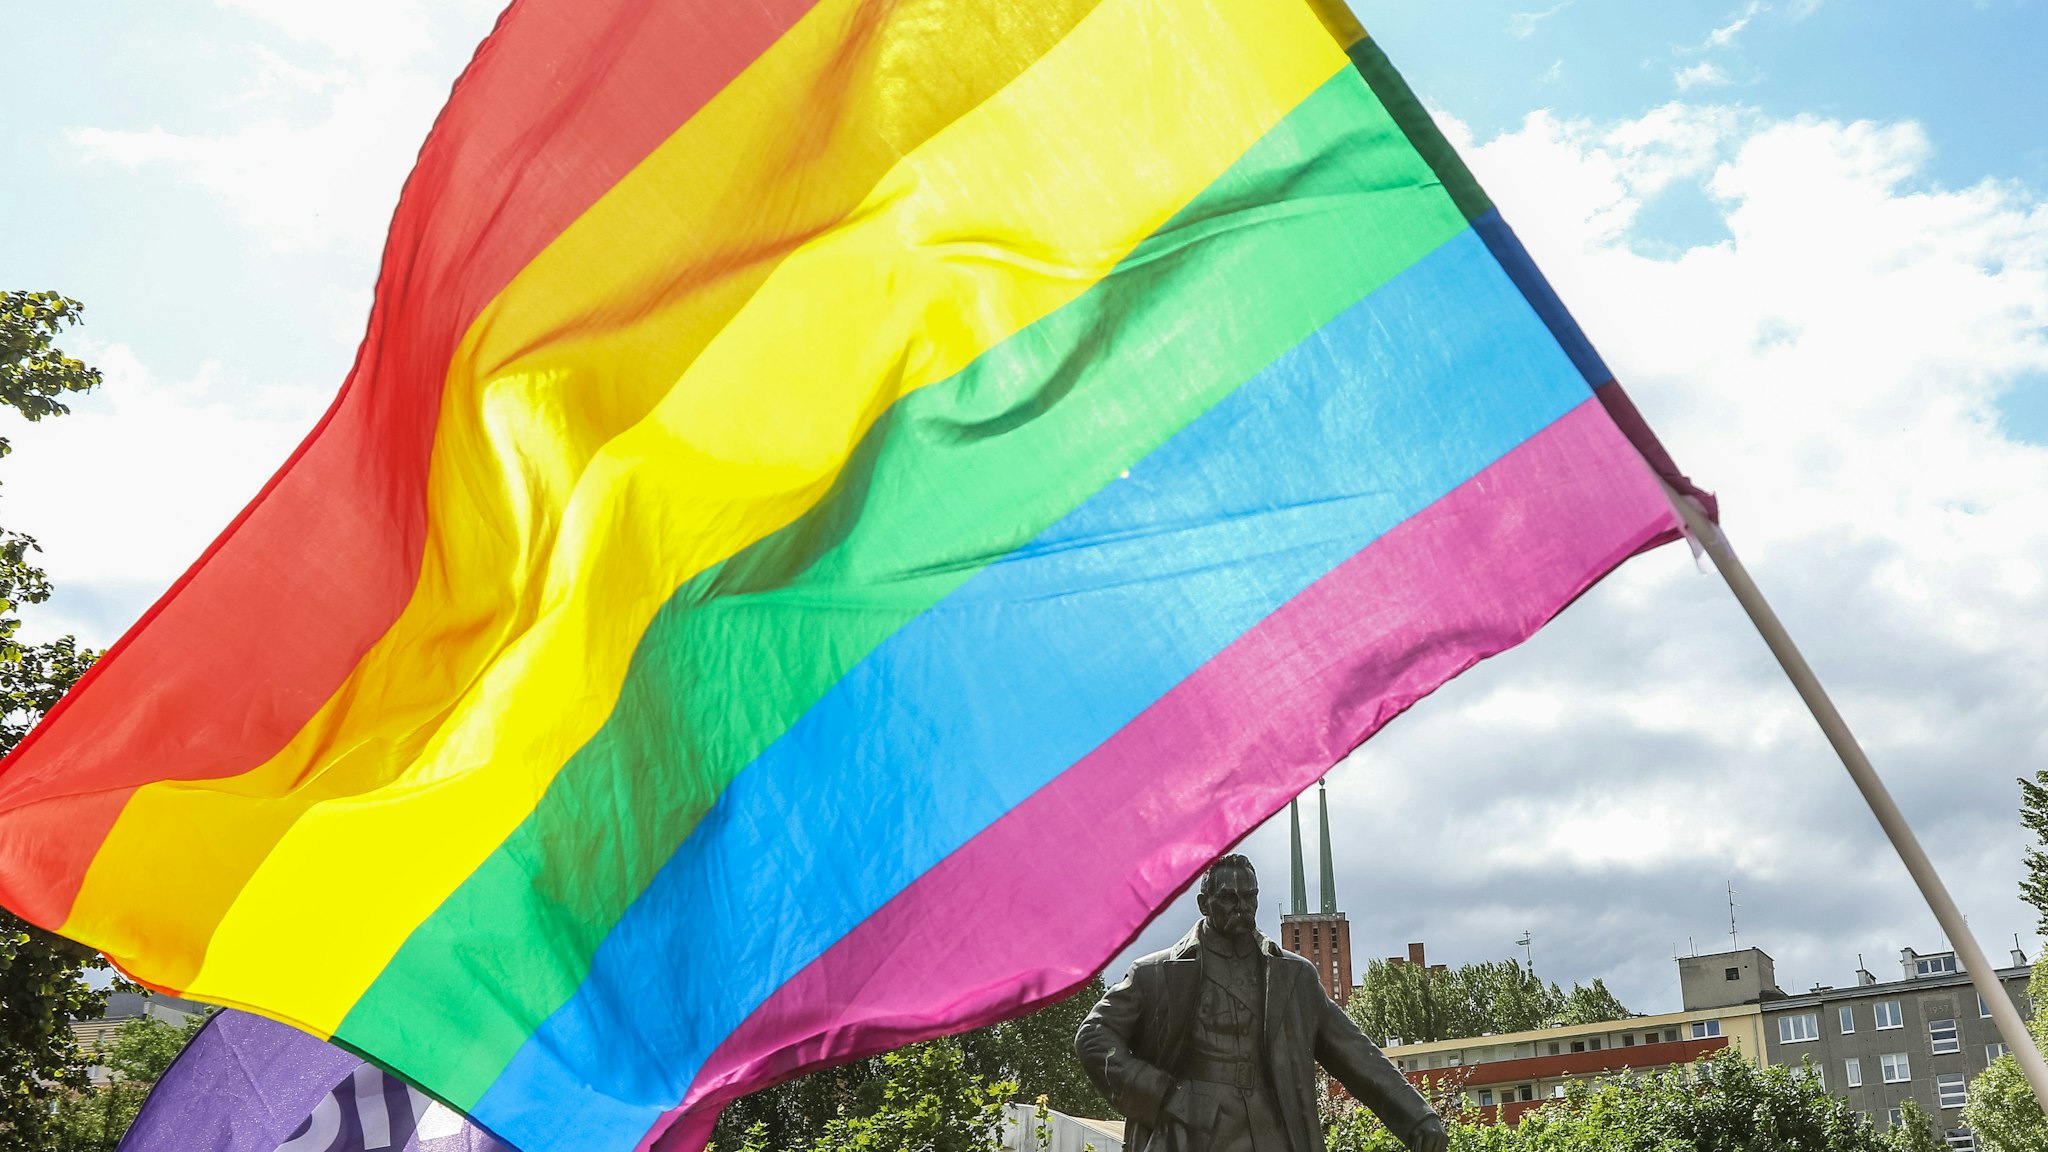 The Equality March (Marsz Rownych) participants holding the rainbow flag in front of Jozef Pilsudski monument are seen in Gdynia, Poland on 7 July 2019 Second Equality March in Gdynia is organised to support LGBTQ